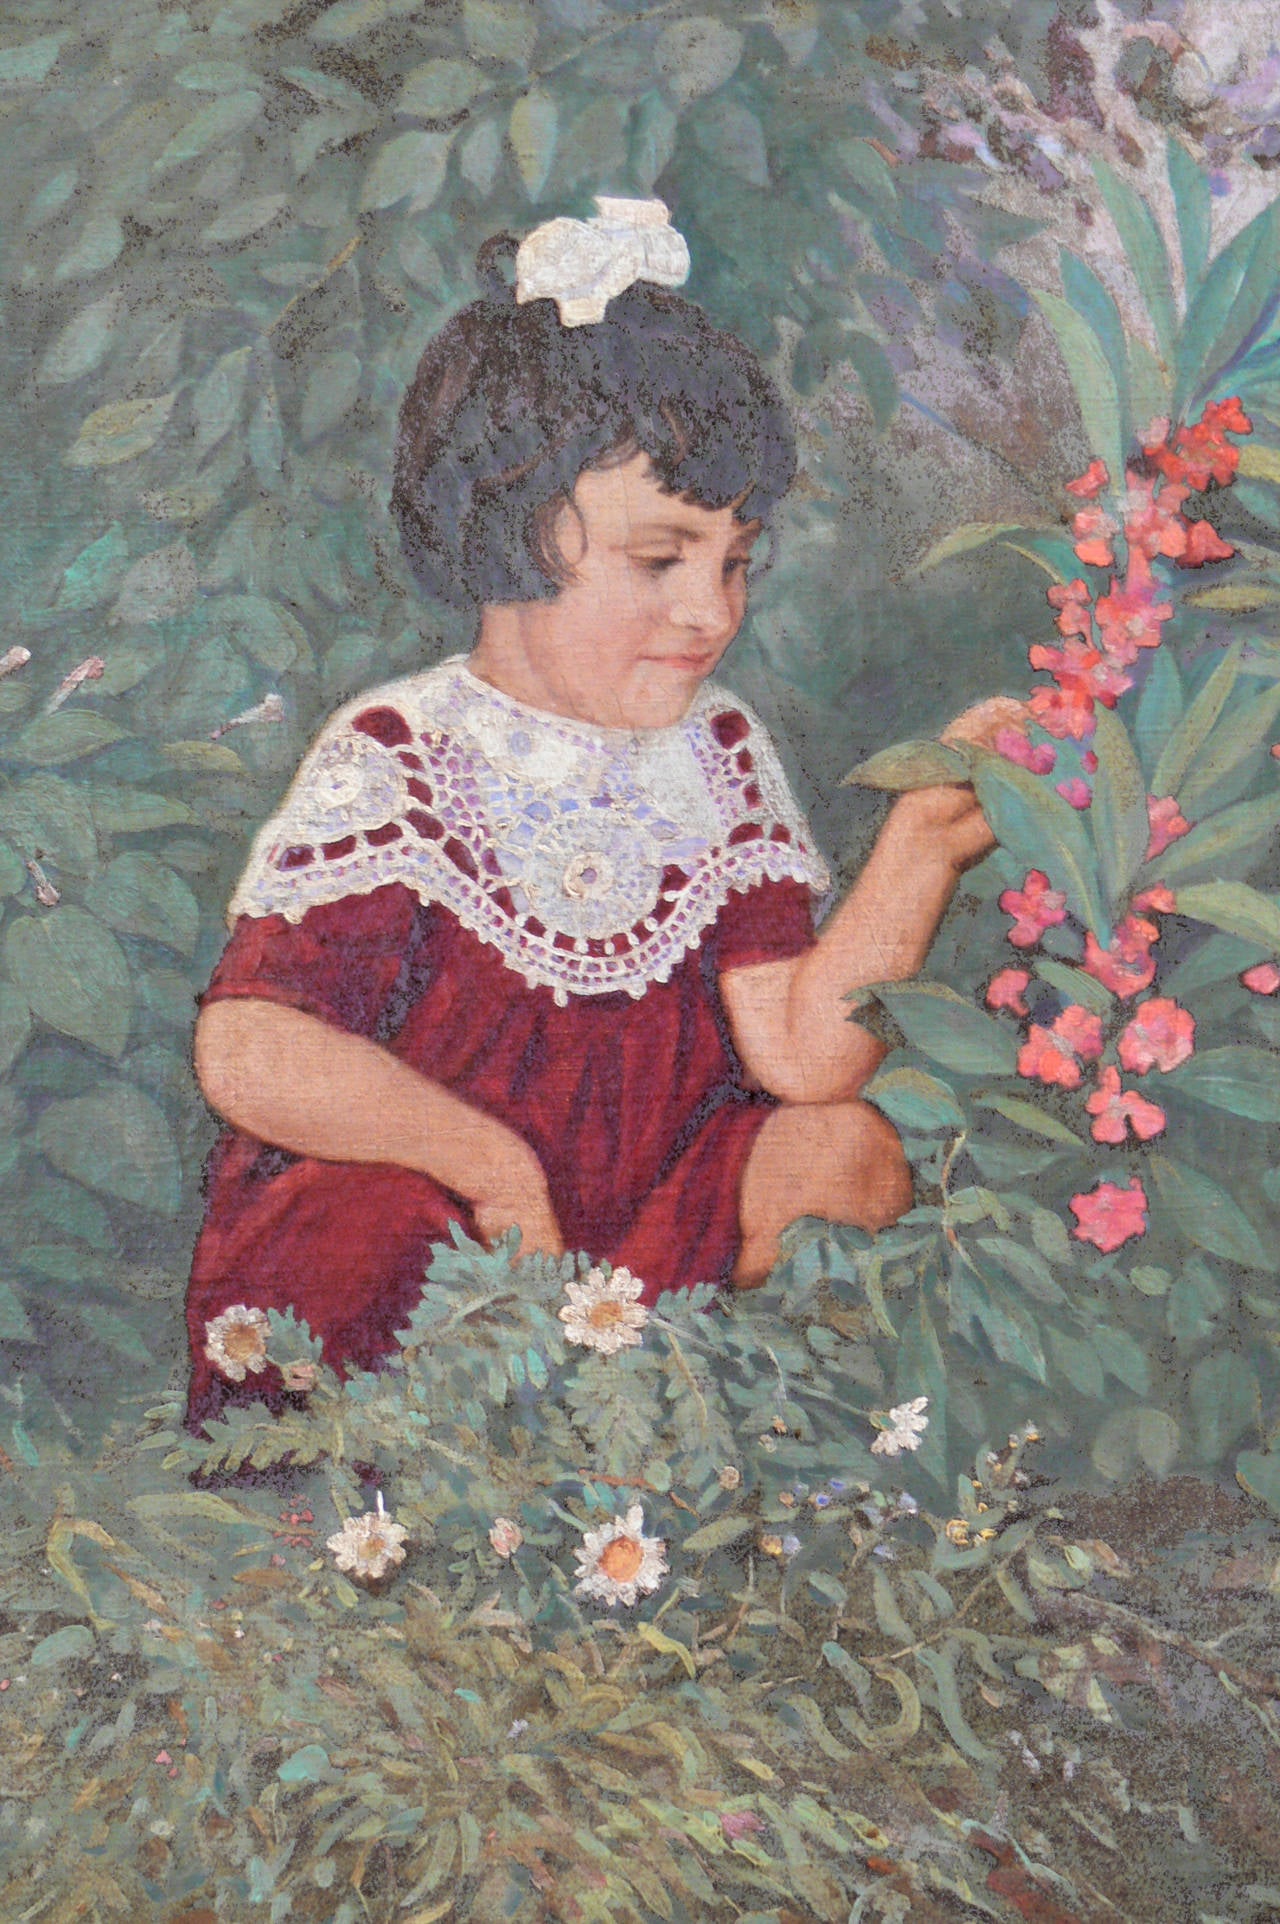 A. Shukov Figurative Painting – Ölgemälde auf Leinwand „A Little Girl with Flowers in a Garden“, 1952